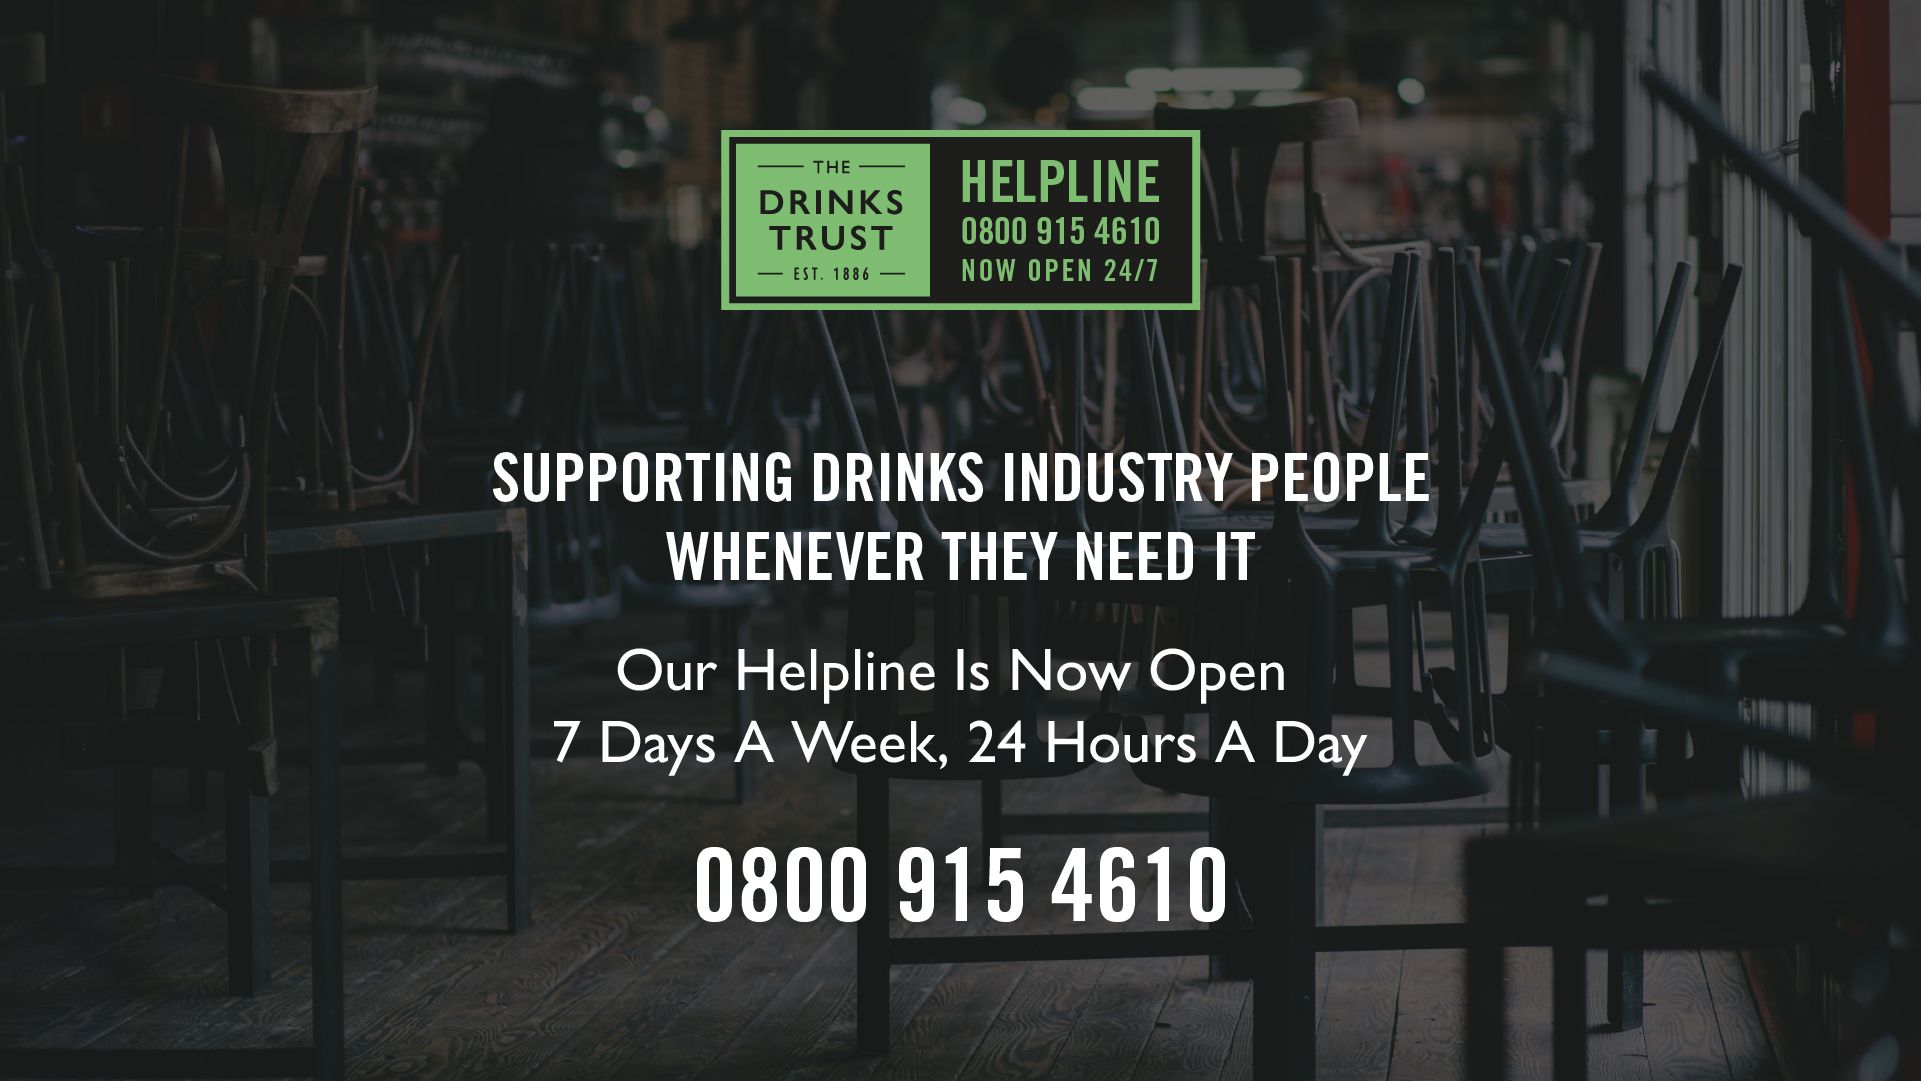 Making the most of Drinks Trust’s new enhanced support services